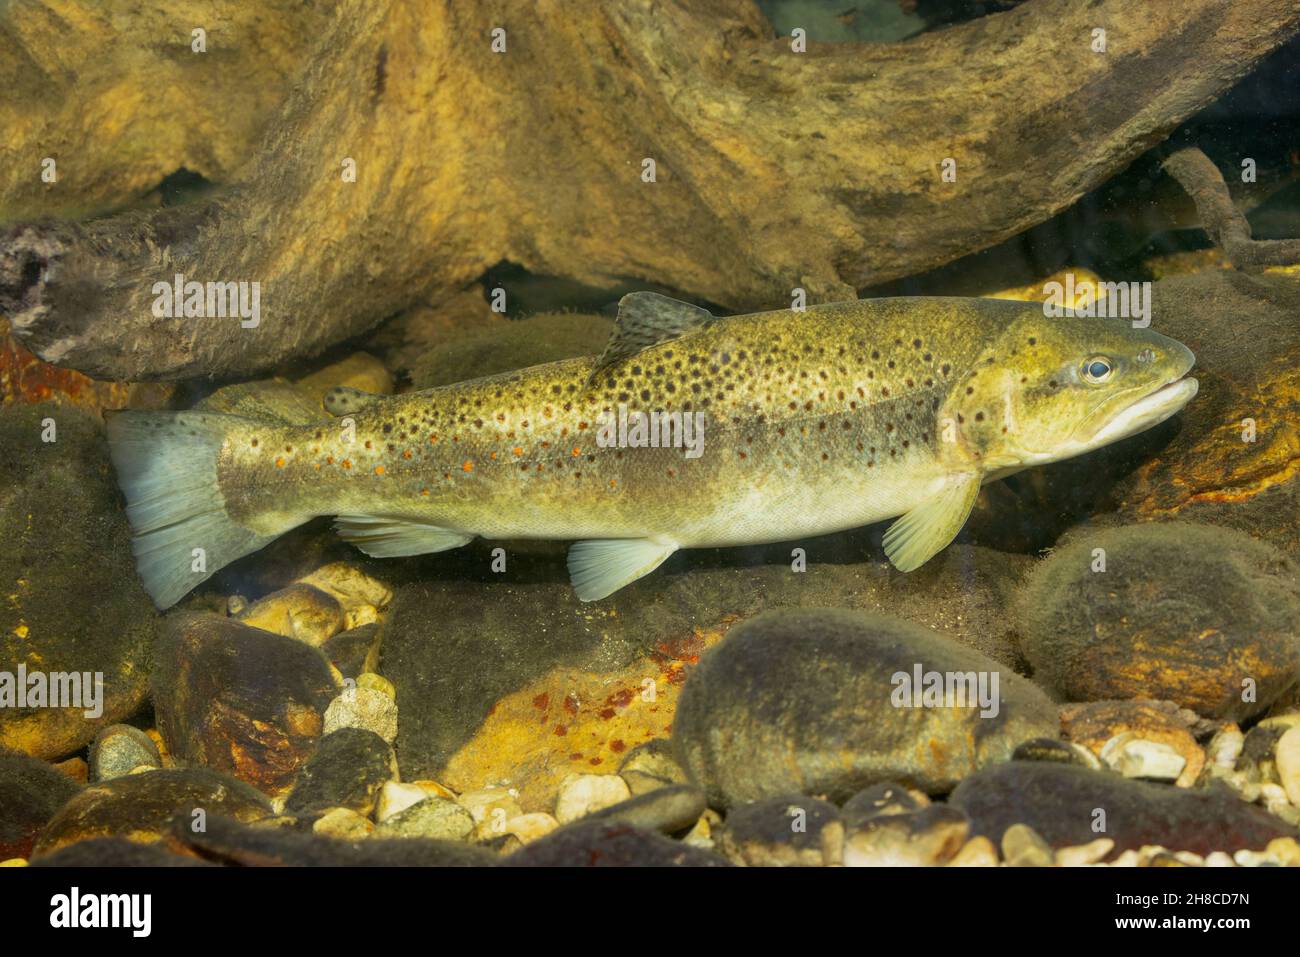 brown trout, river trout, brook trout (Salmo trutta fario), protective colouration in front of deadwood, Germany Stock Photo